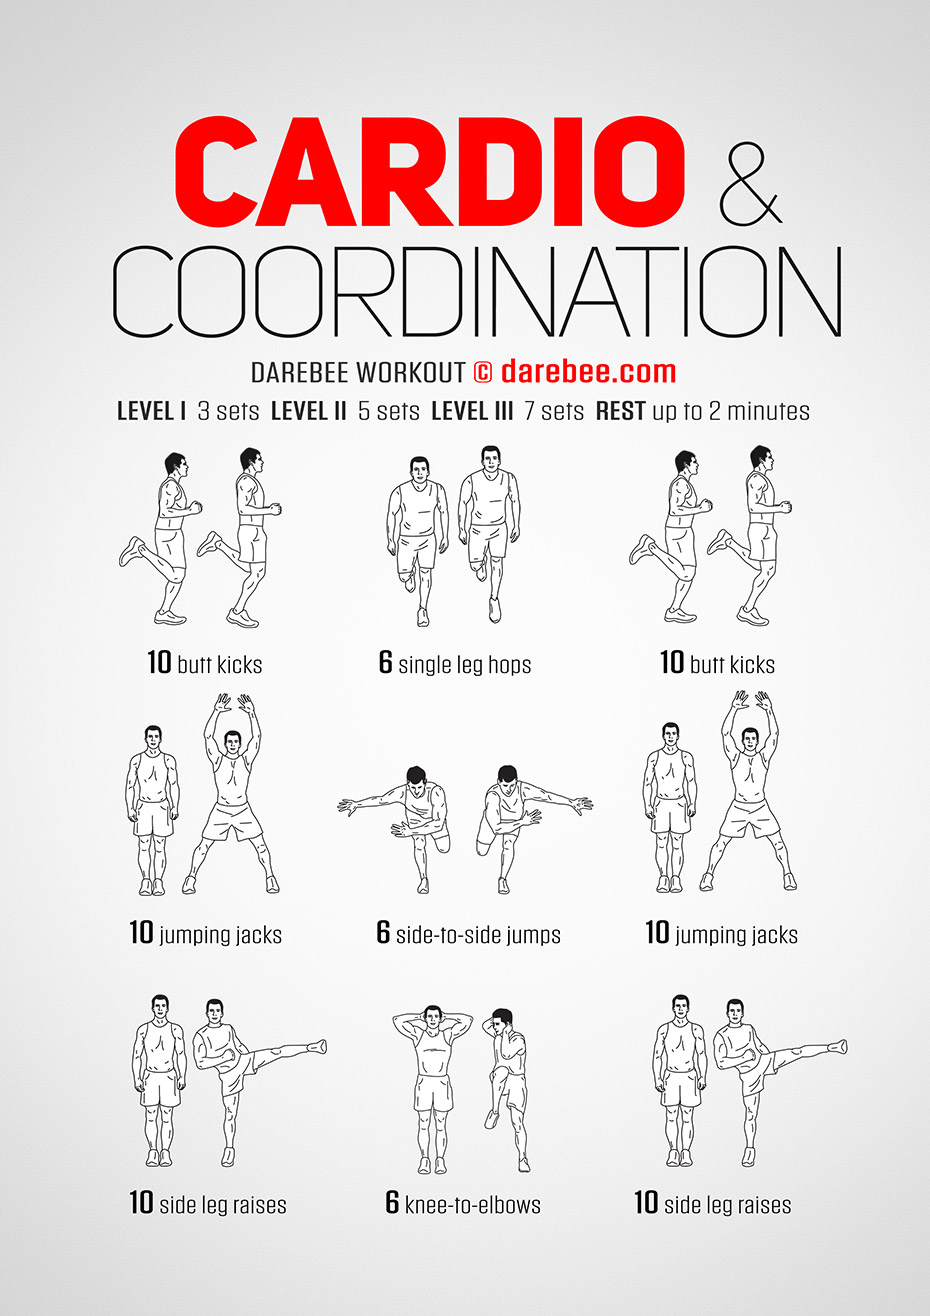 I. Introduction to Cardiovascular Exercise for Coordination